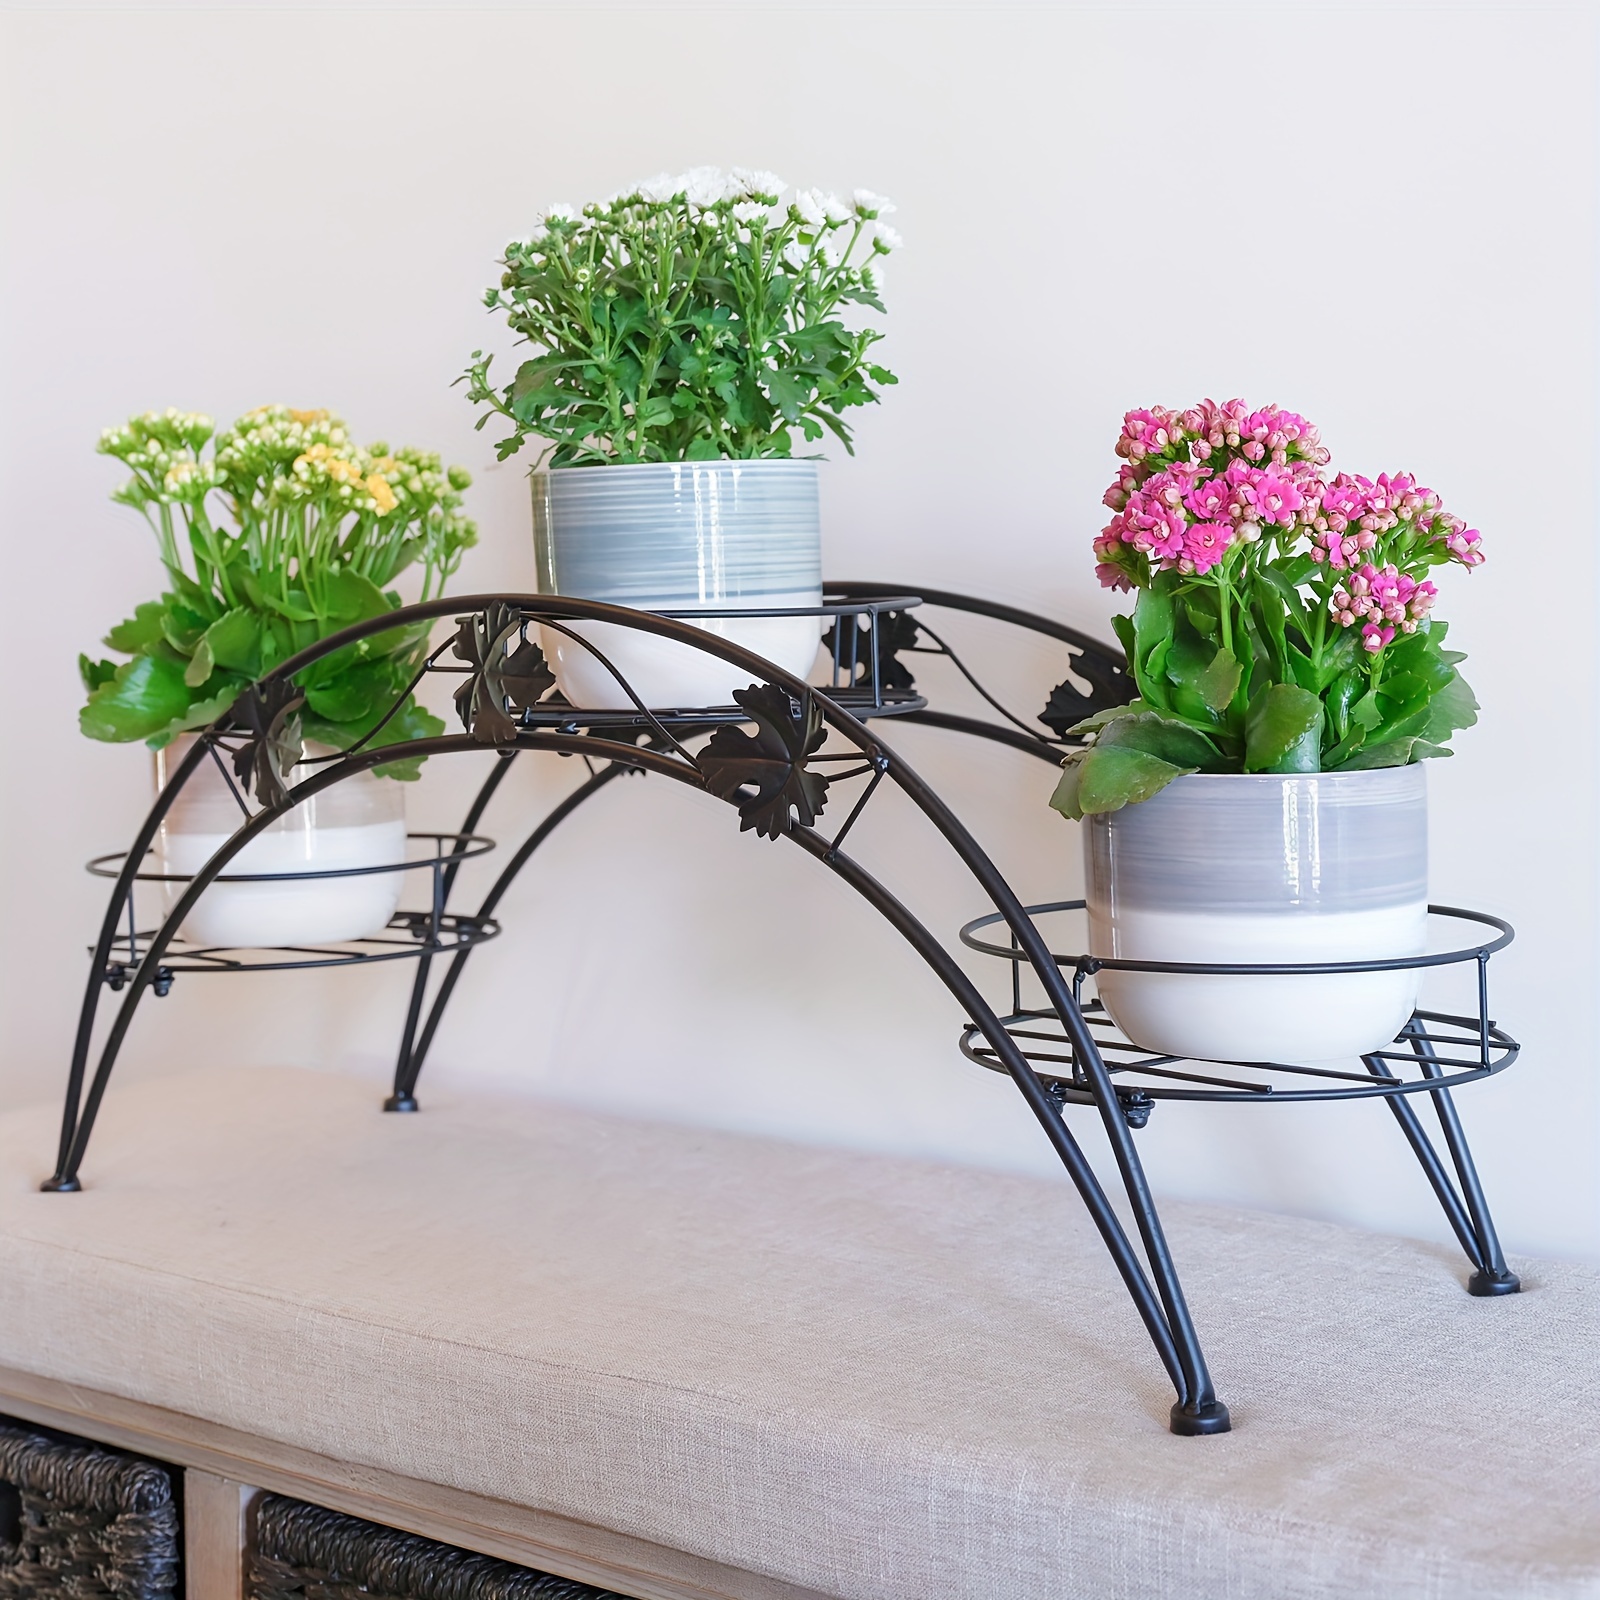 

Courtyard Arch Flower Pot Storage Rack, Outdoor Garden Simple Iron Potted Plant Display Rack Can Accommodate 3 Pots Of Flowers